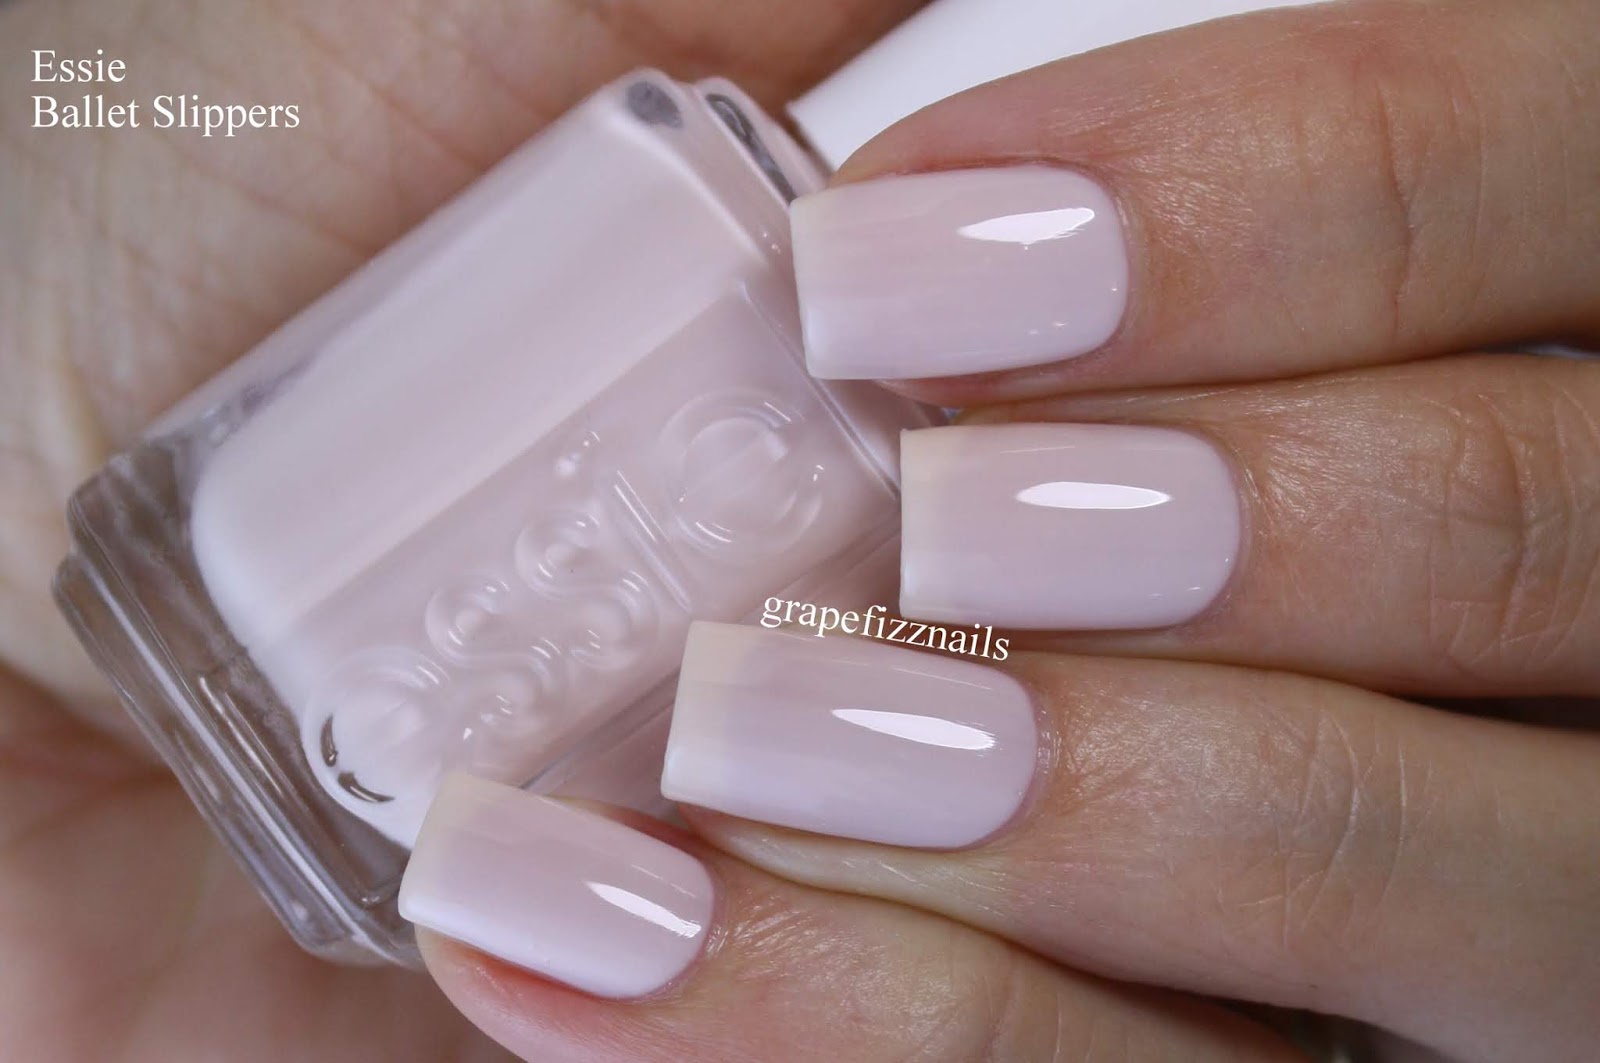 2. Essie Nail Polish in "Ballet Slippers" - wide 7